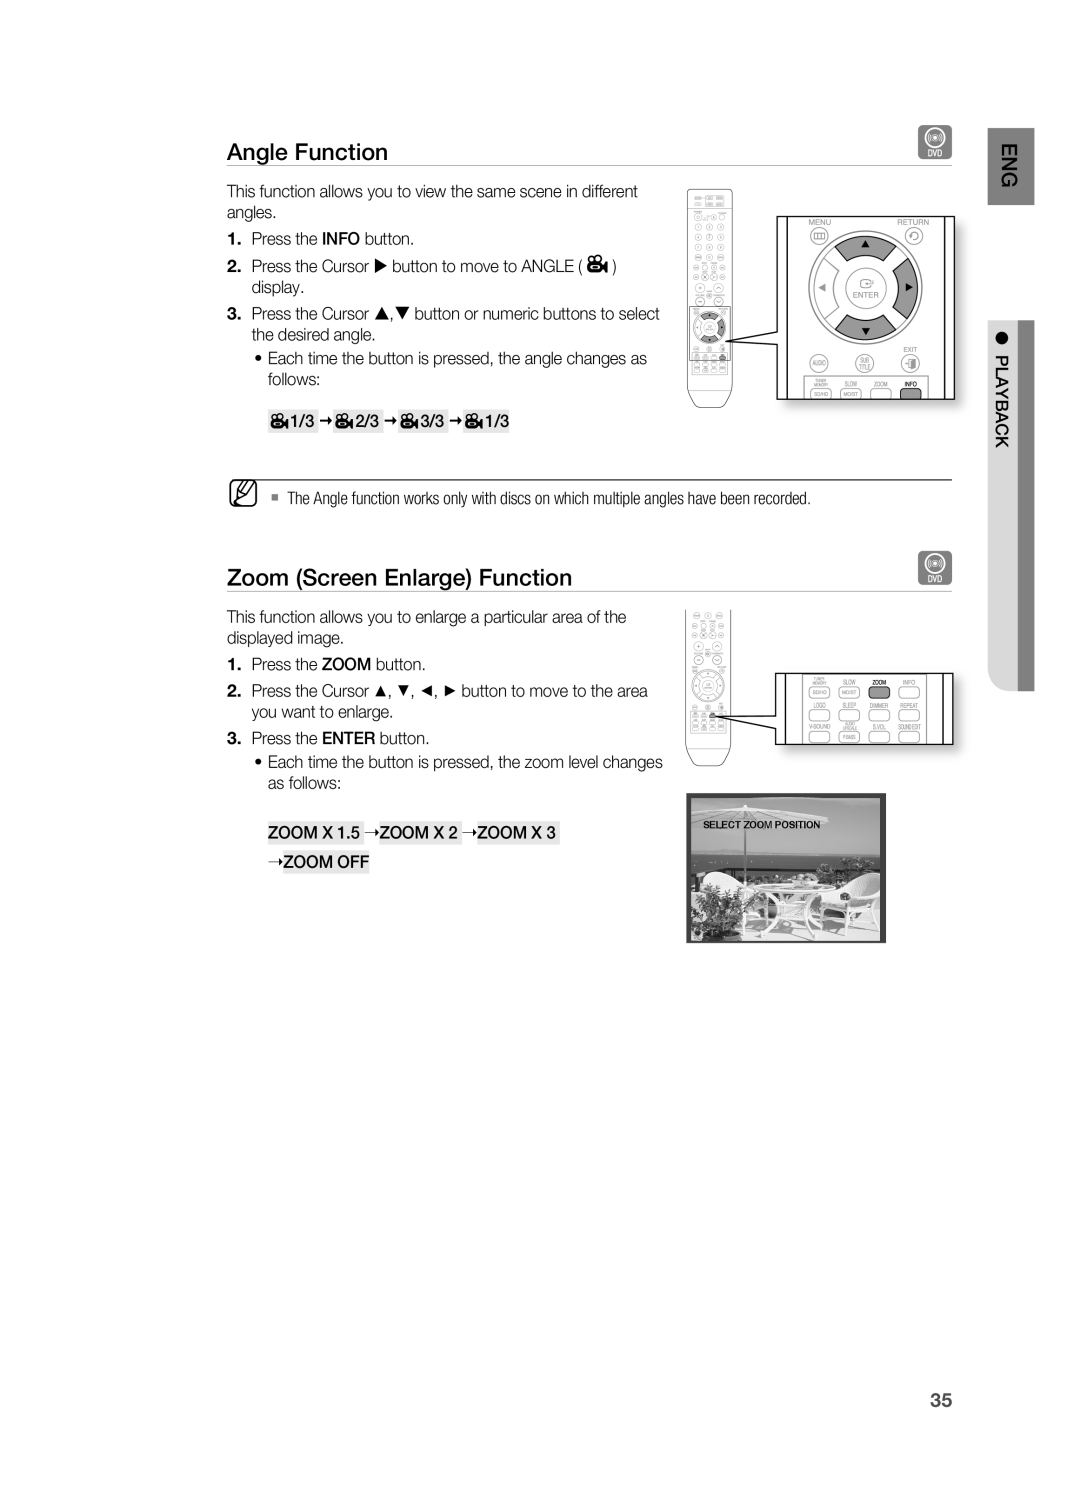 Sony HT-X810 user manual Angle Function, Zoom Screen Enlarge Function, Select Zoom Position 